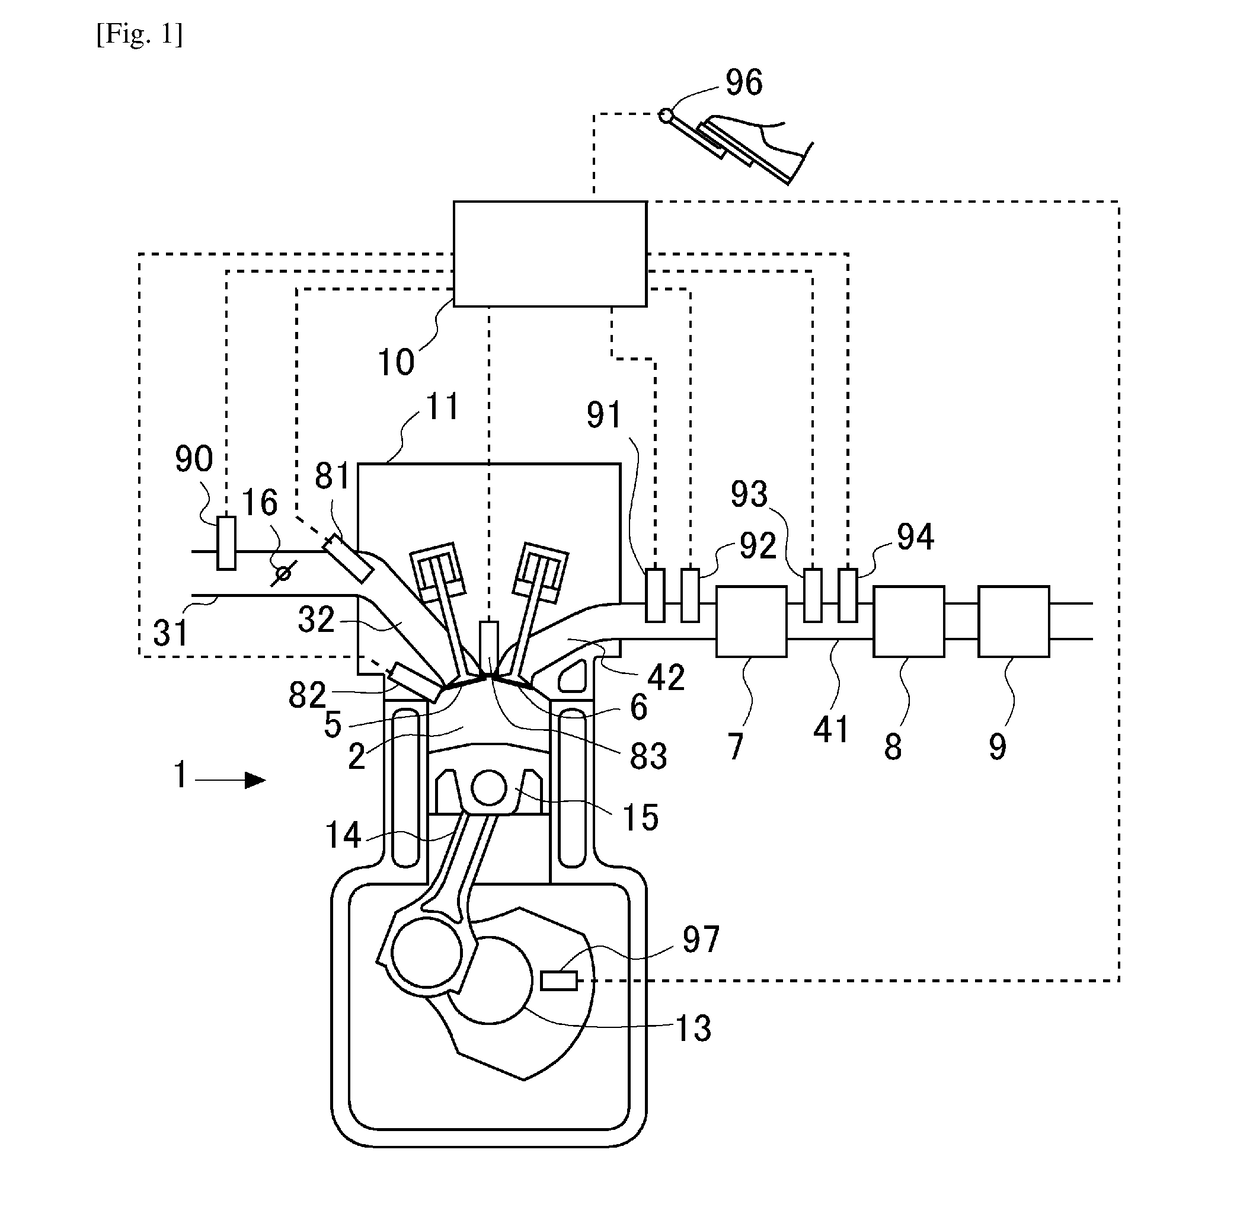 Control system for an internal combustion engine